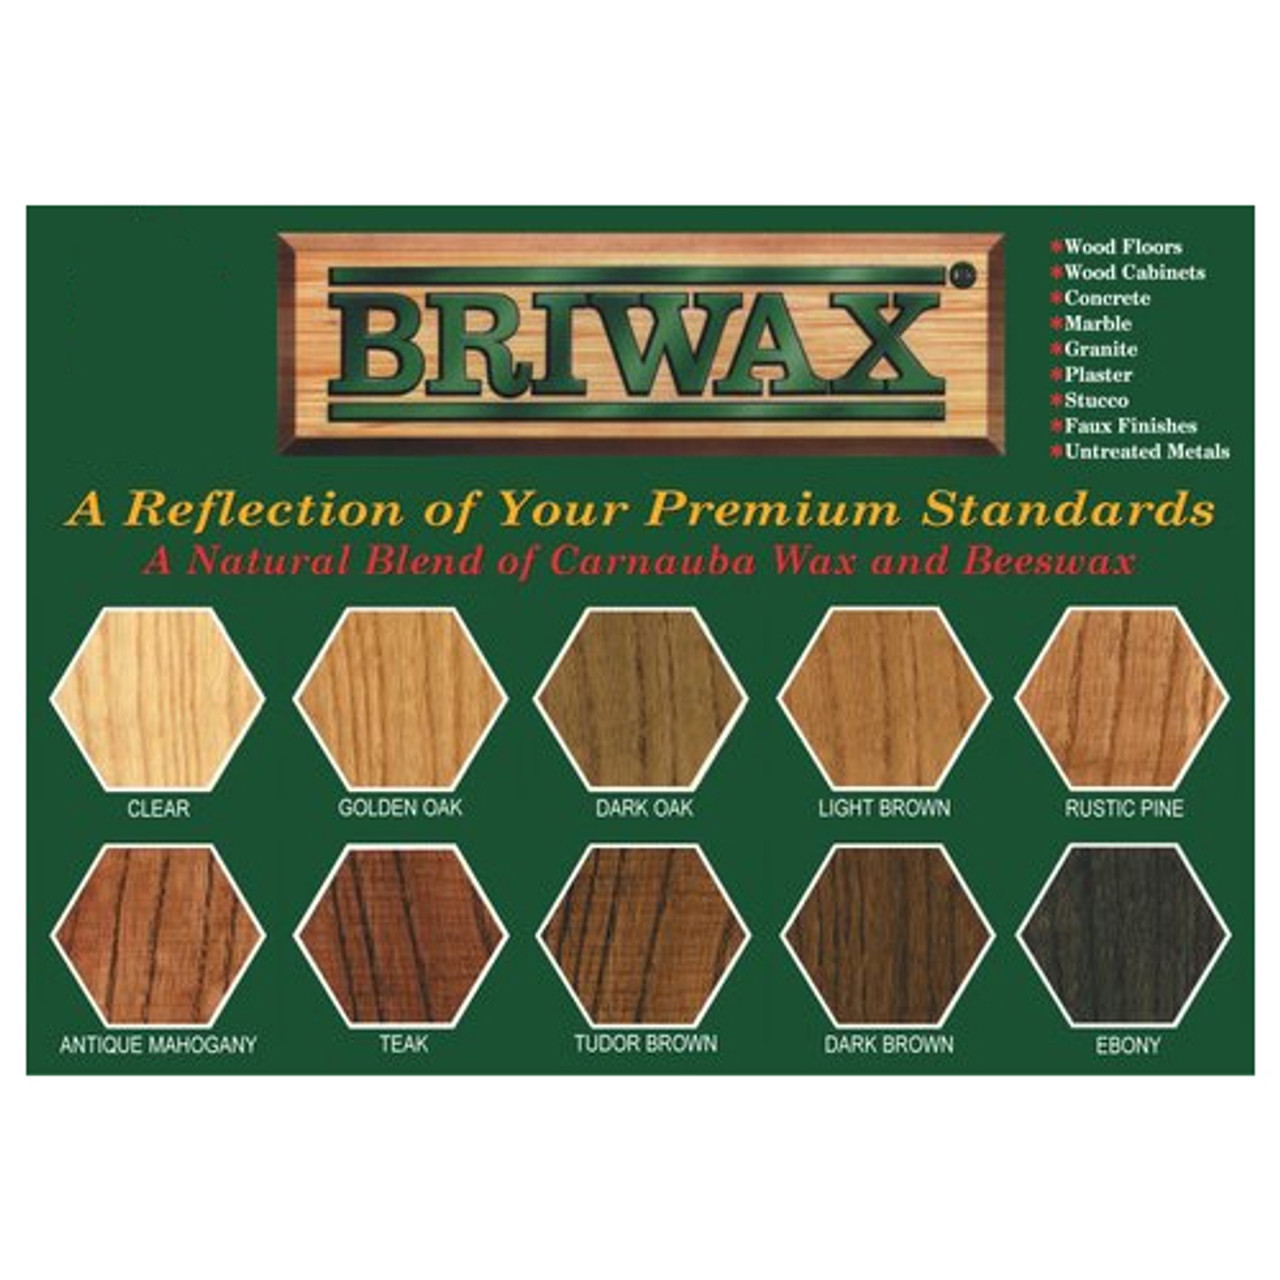 Briwax: Refinishing Antiques The Easy Way